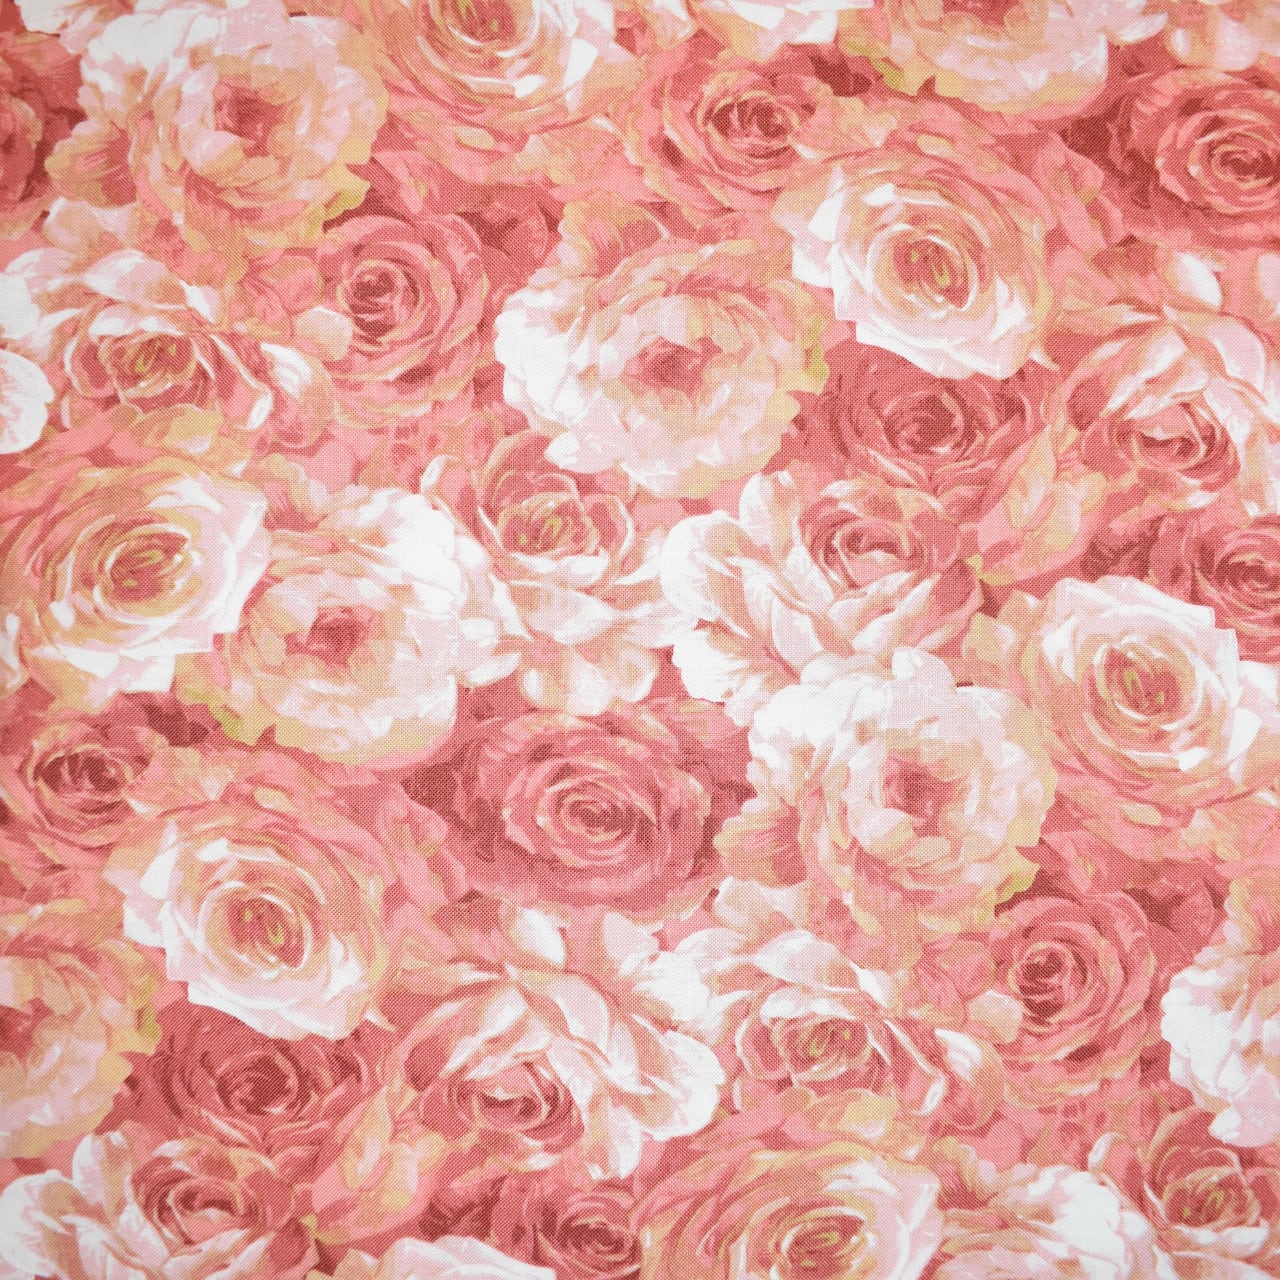 Floral Packed Pink Rose Cotton Fabric